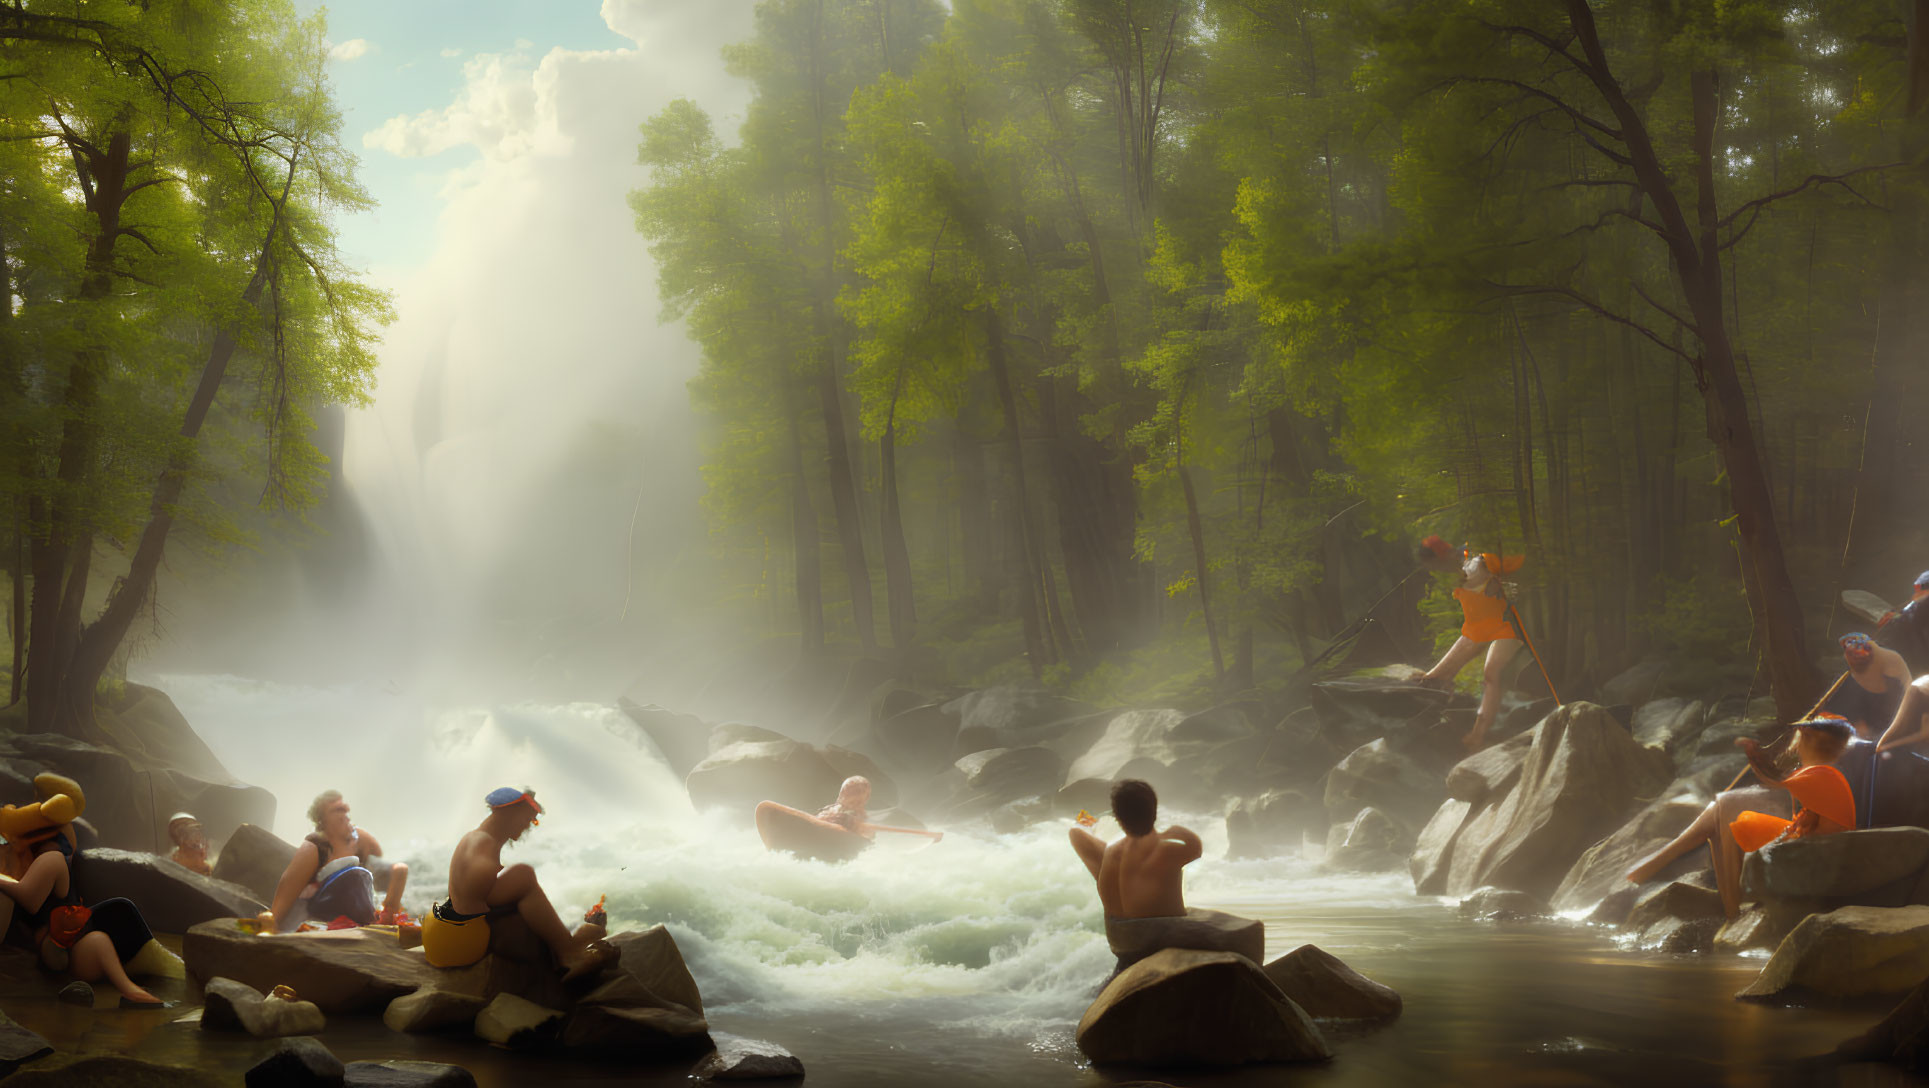 Tranquil waterfall scene with mist, lush trees, and people relaxing in summer attire